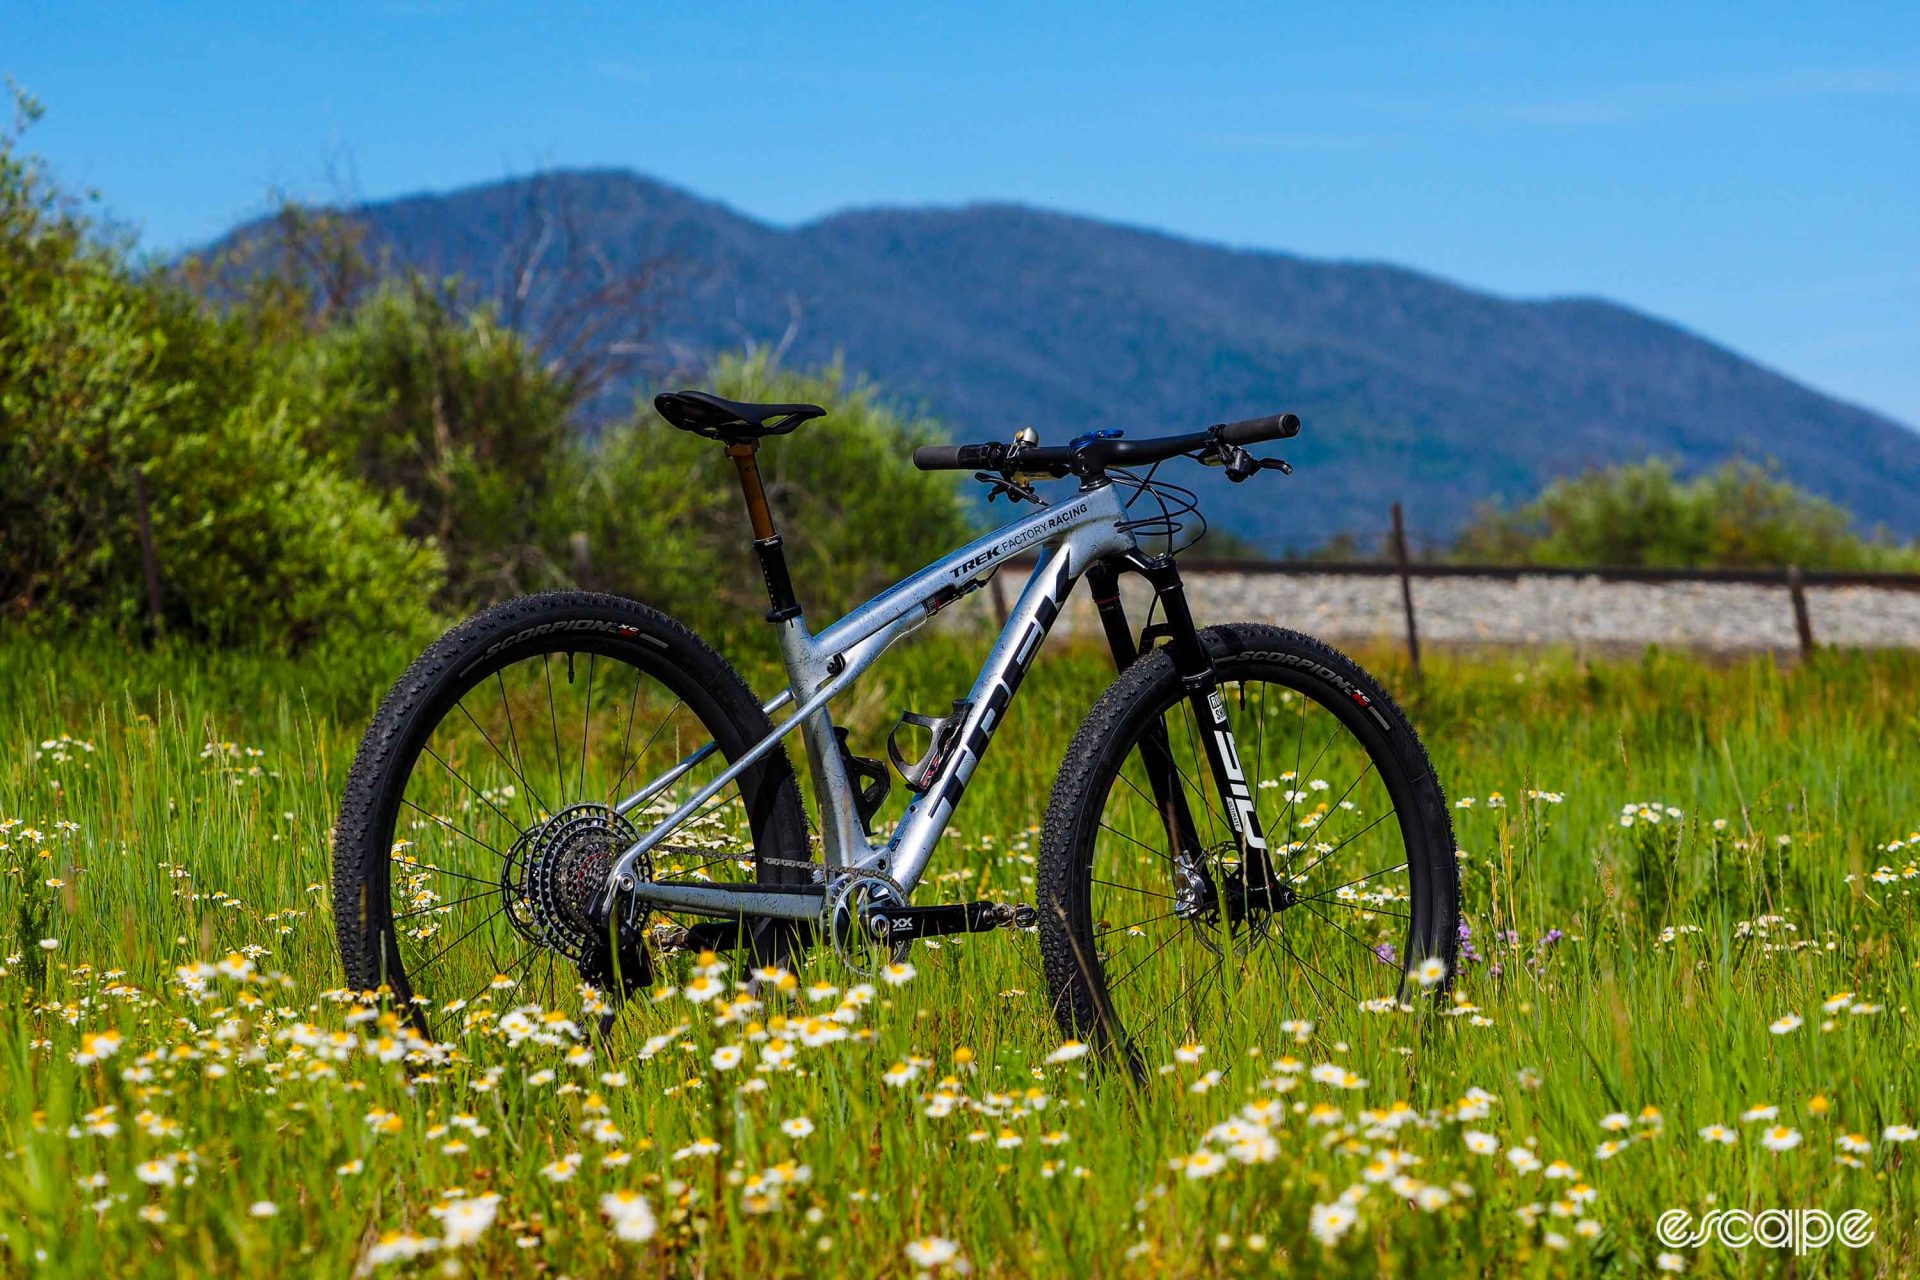 A metallic gray Supercaliber with black logos appears in a field of wildflowers, with a railroad grade and a green forested hill in the background.